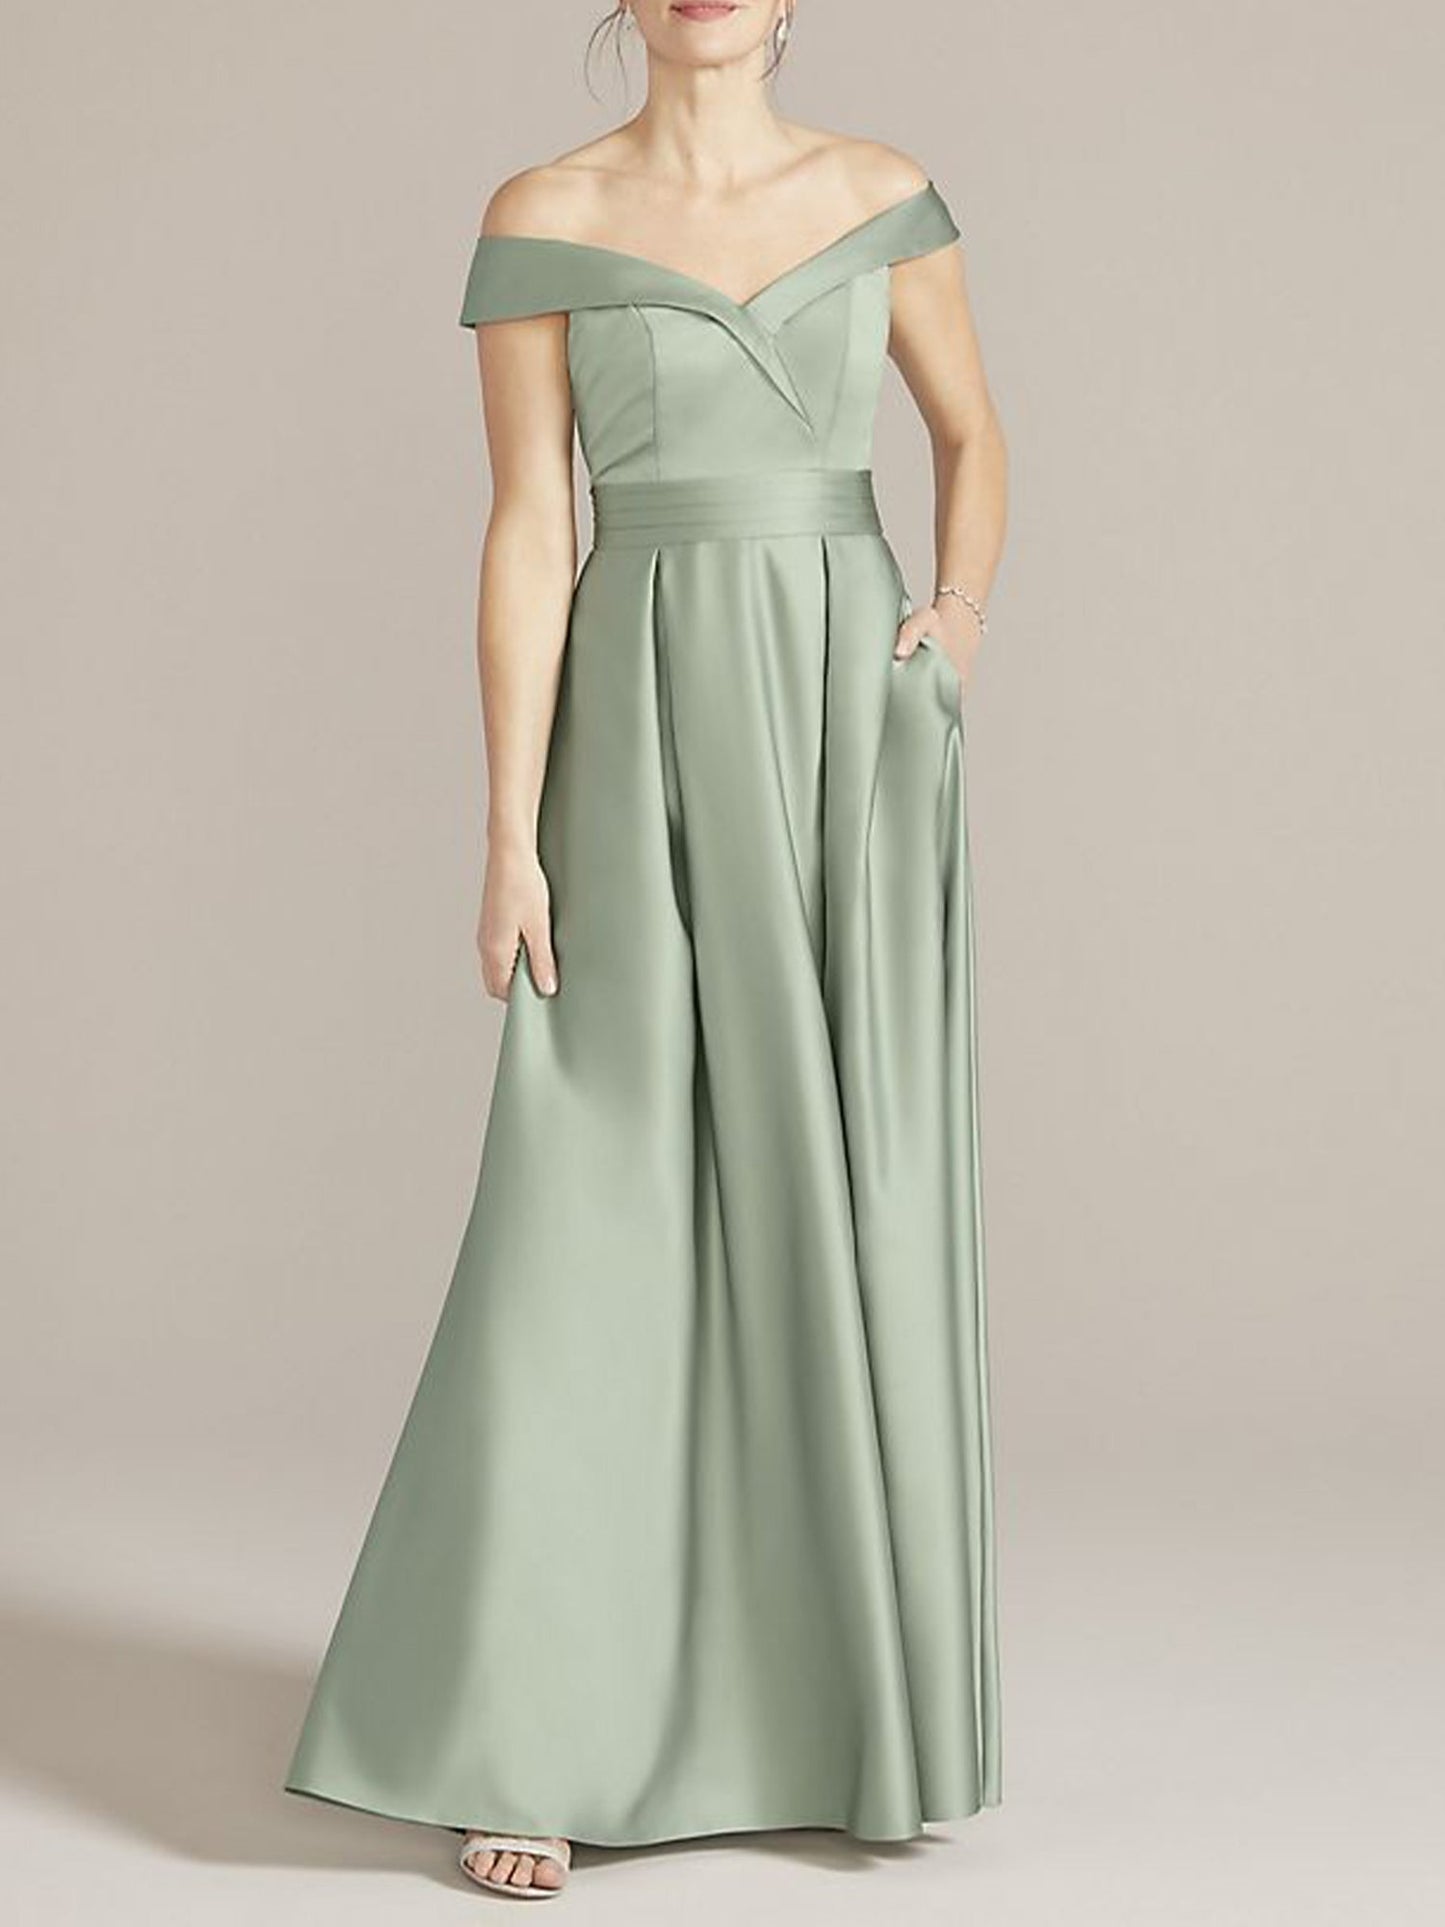 Stretch Satin Off the Shoulder Sleeveless Bridesmaid Dress| Plus Size | 60+ Colors